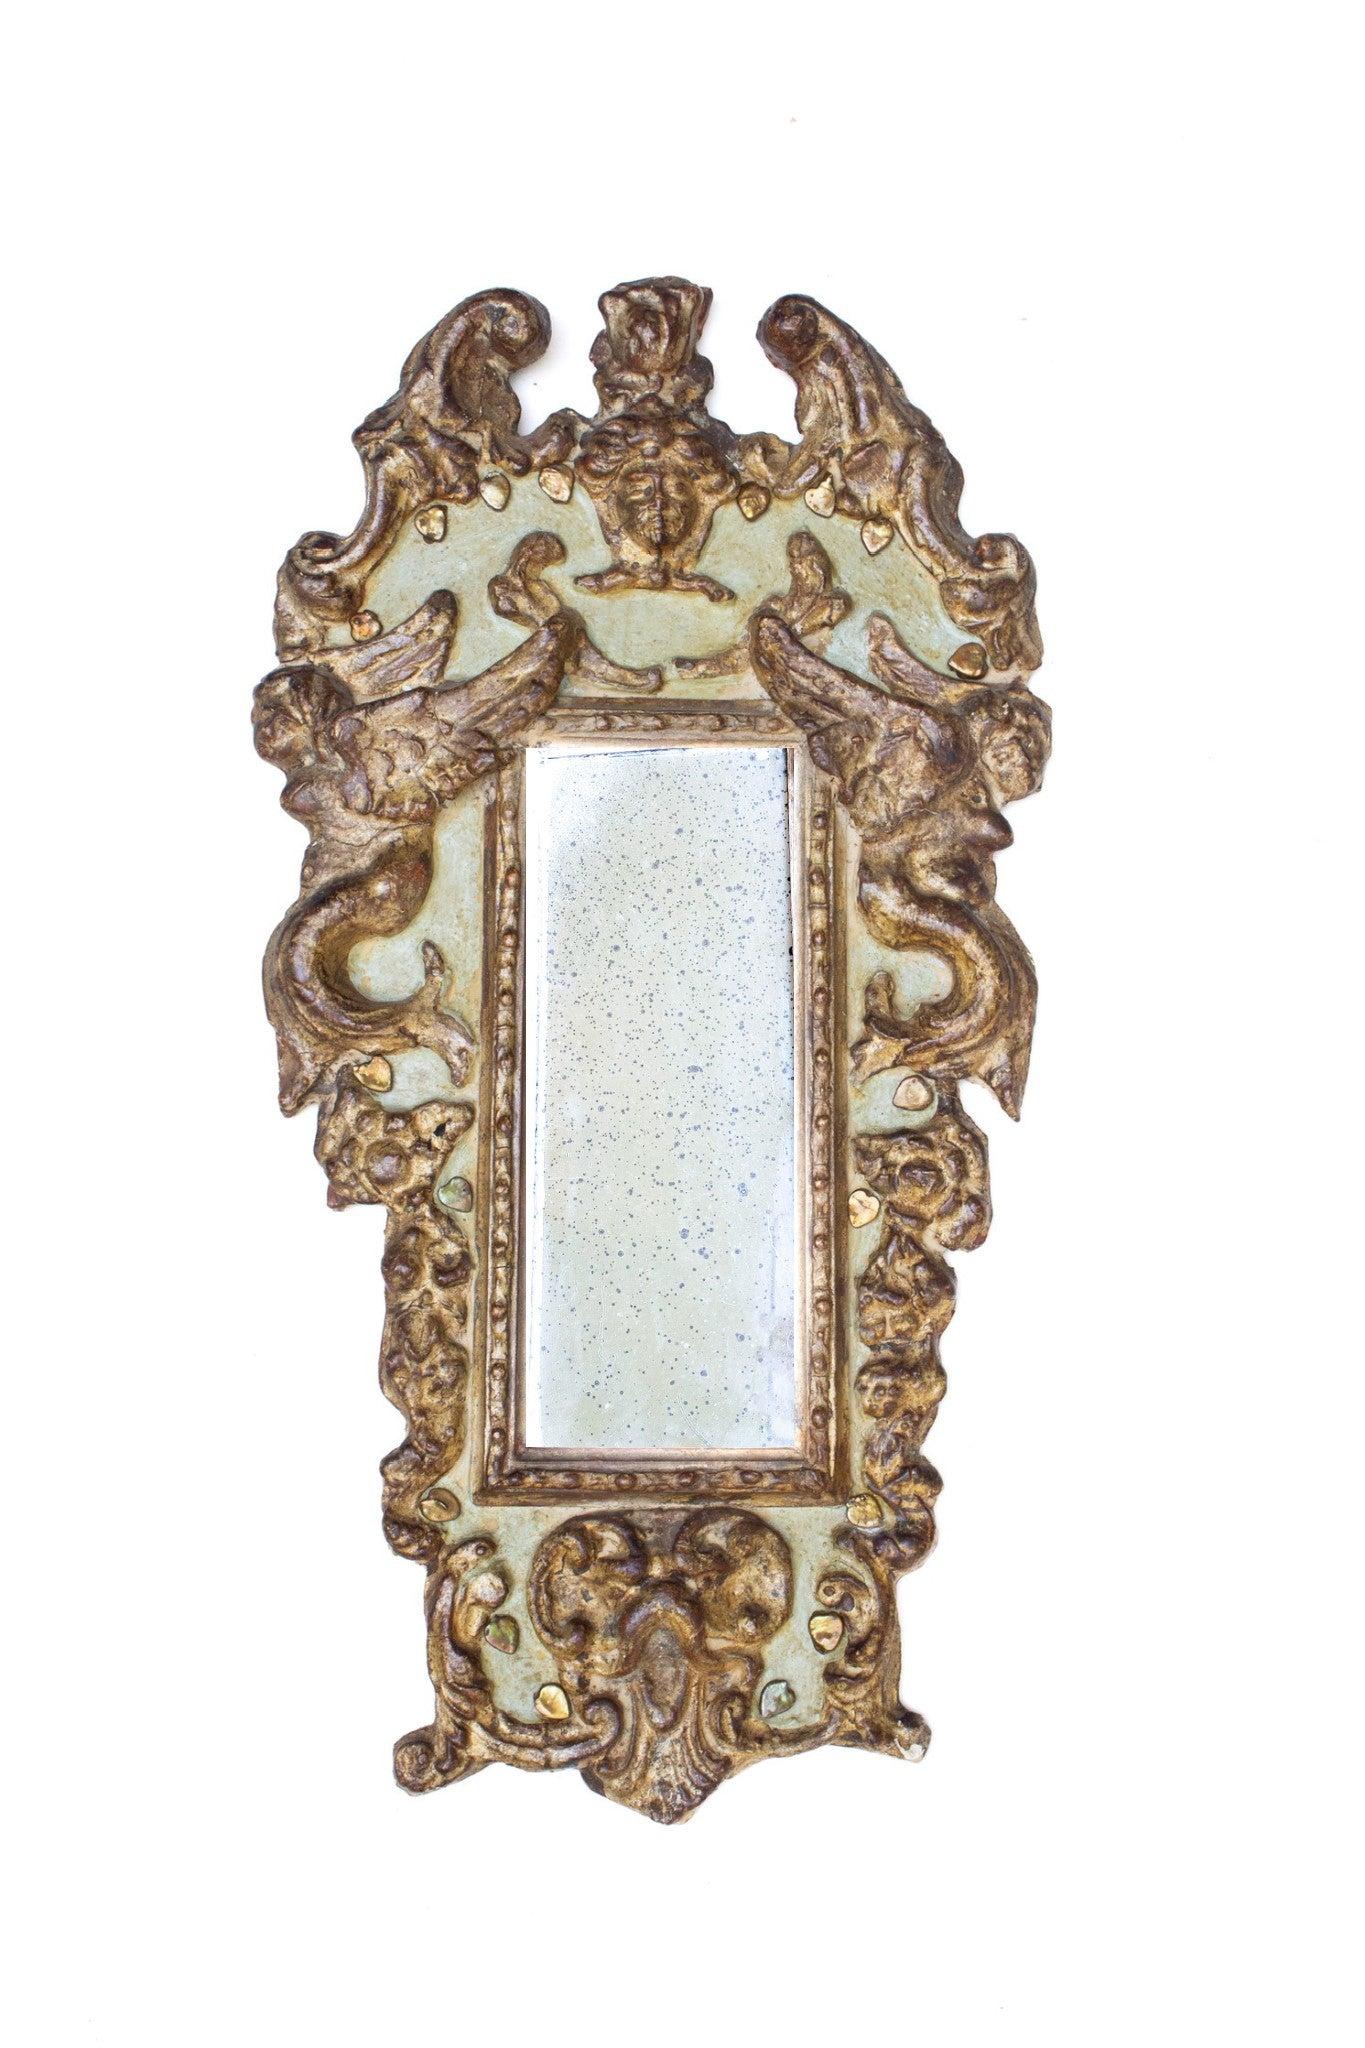 Pair of 18th Century Italian Rococo Green and Gilded Cherub Mirrors In Good Condition For Sale In Dublin, Dalkey